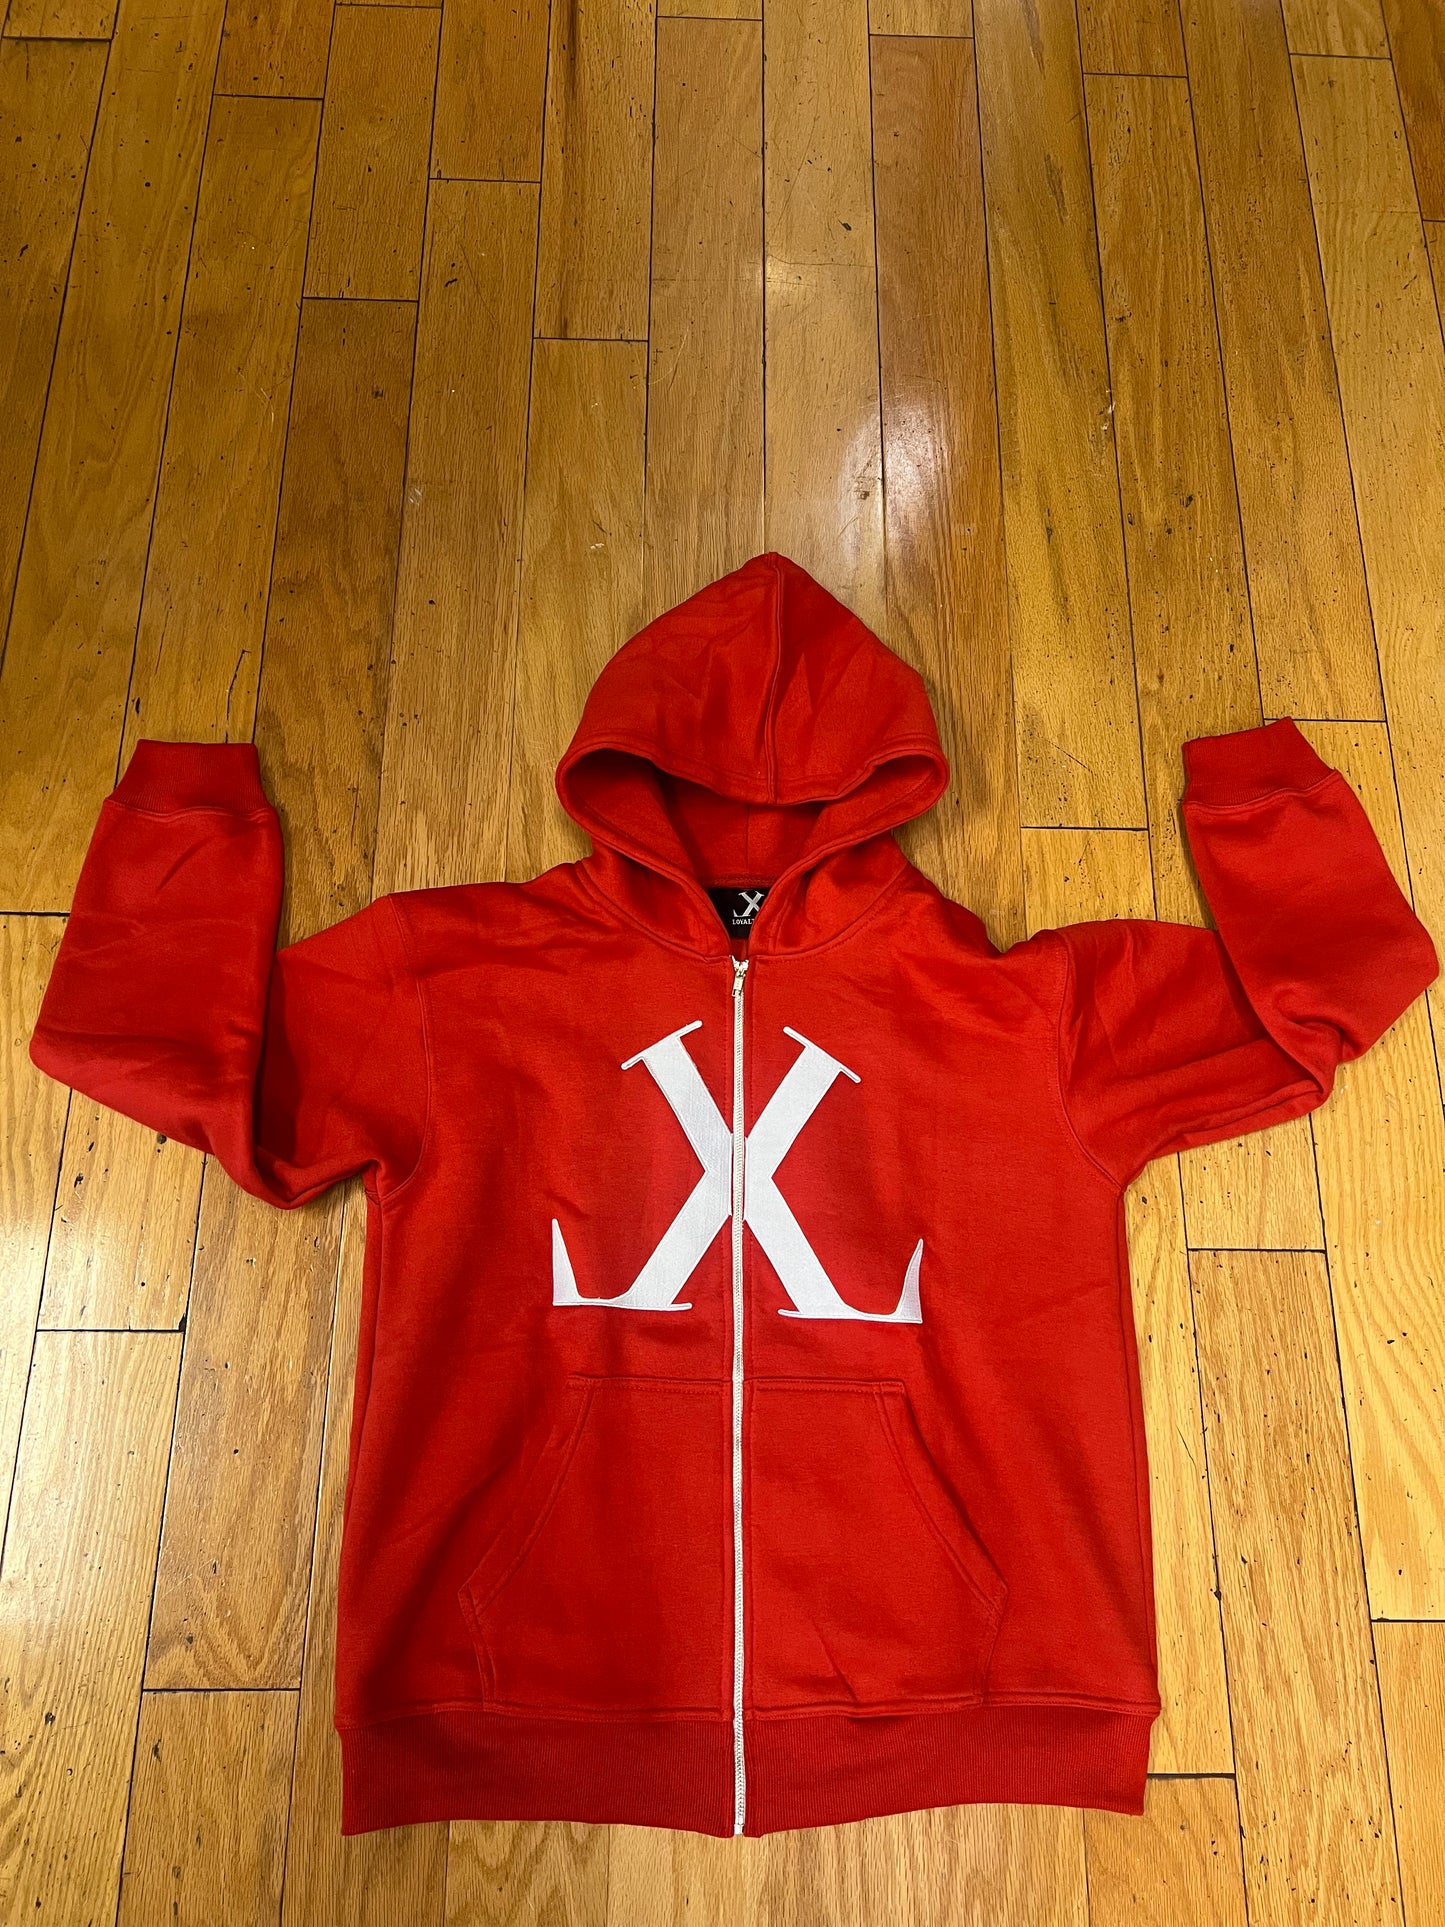 Red Loyalty Love Zip up